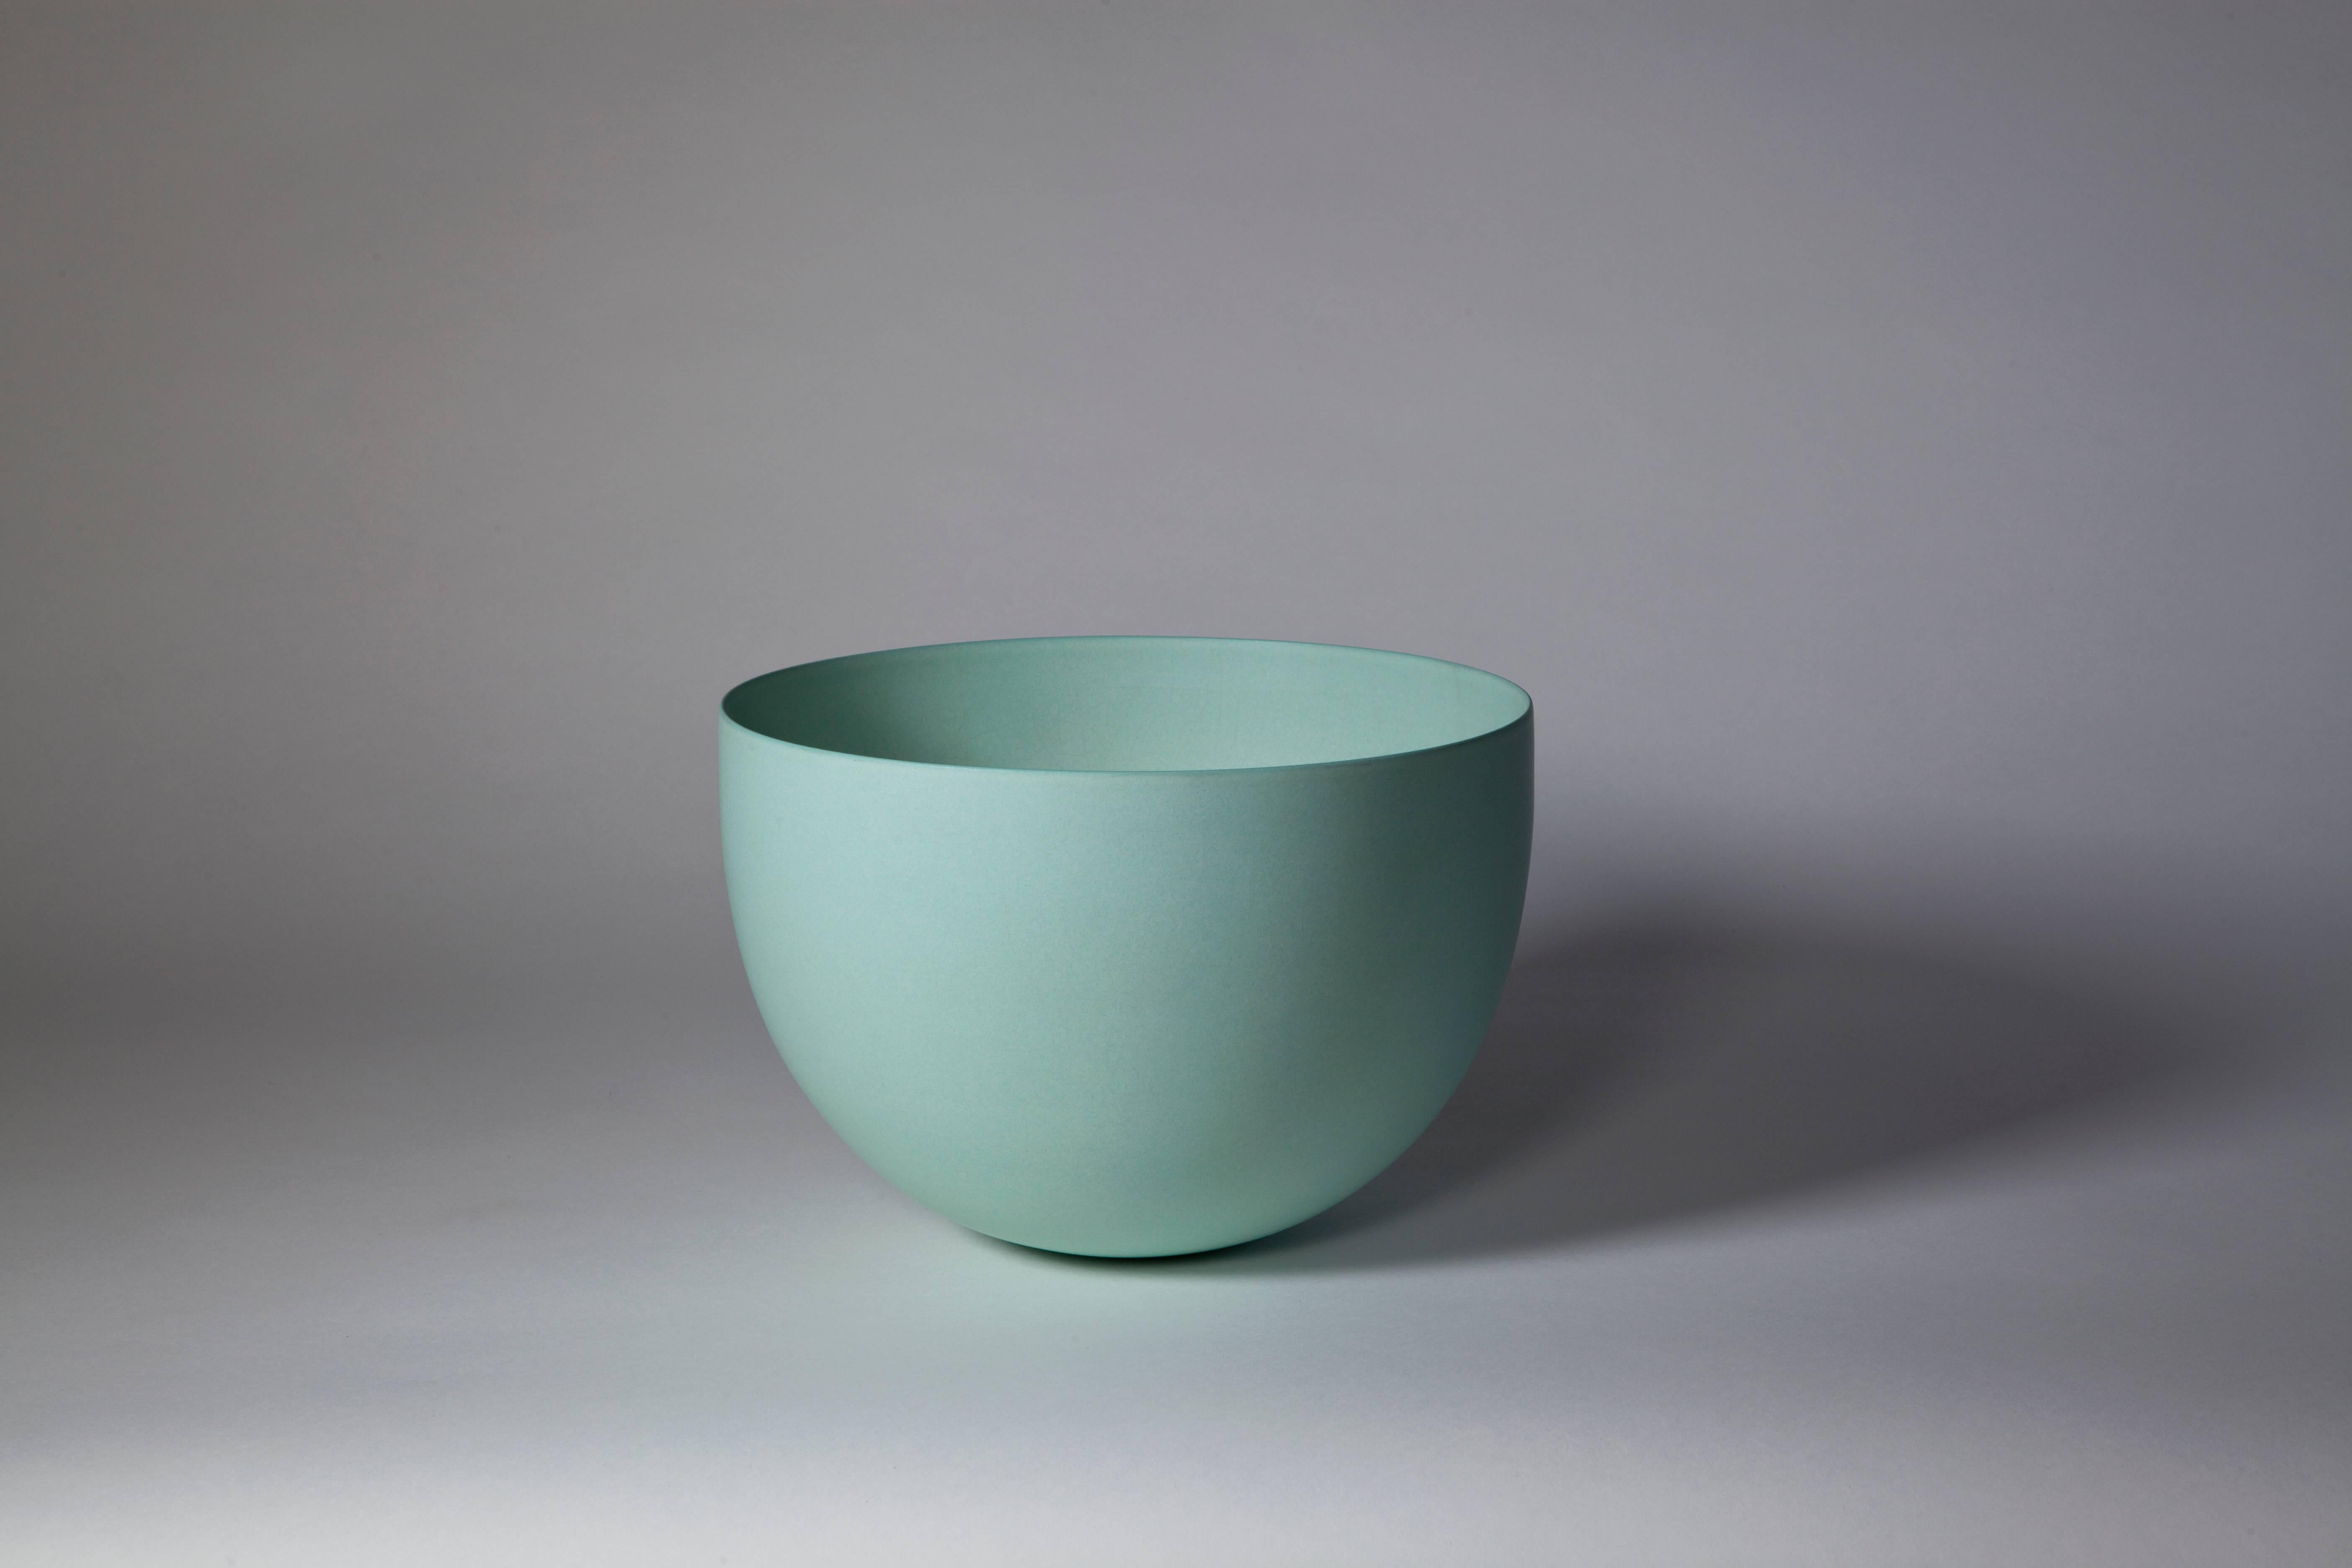 Unique bowl created by Geert Lap. Based on the shape and color, this bowl can be dated circa 1988. In 1987, Lap began using a terra sigilata glaze on his stoneware. This terra sigilata glaze gives a beautiful semi-matte satiny sheen and also